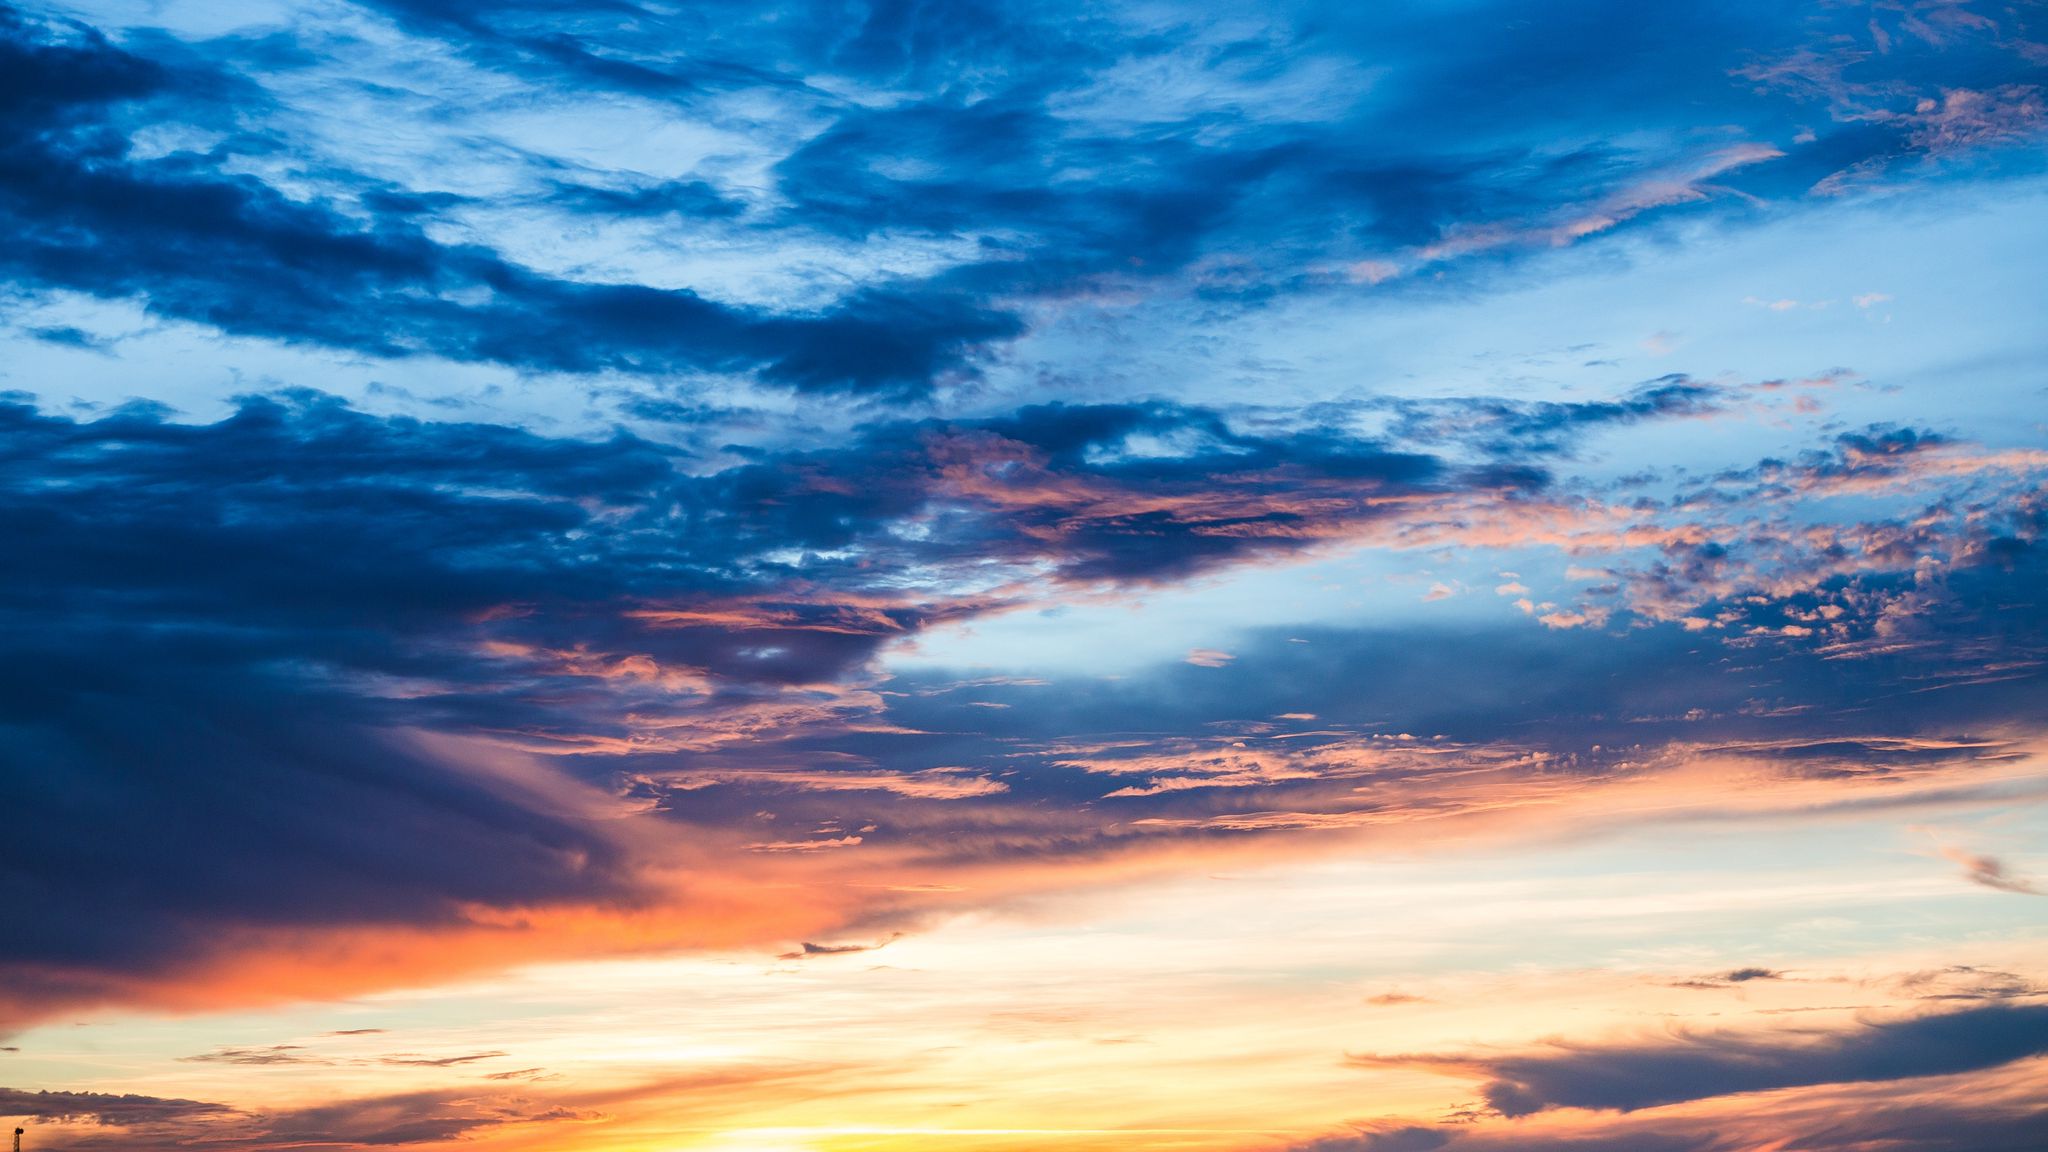 Download Wallpaper 2048x1152 Clouds Sunset Sky Ultrawide Monitor Hd